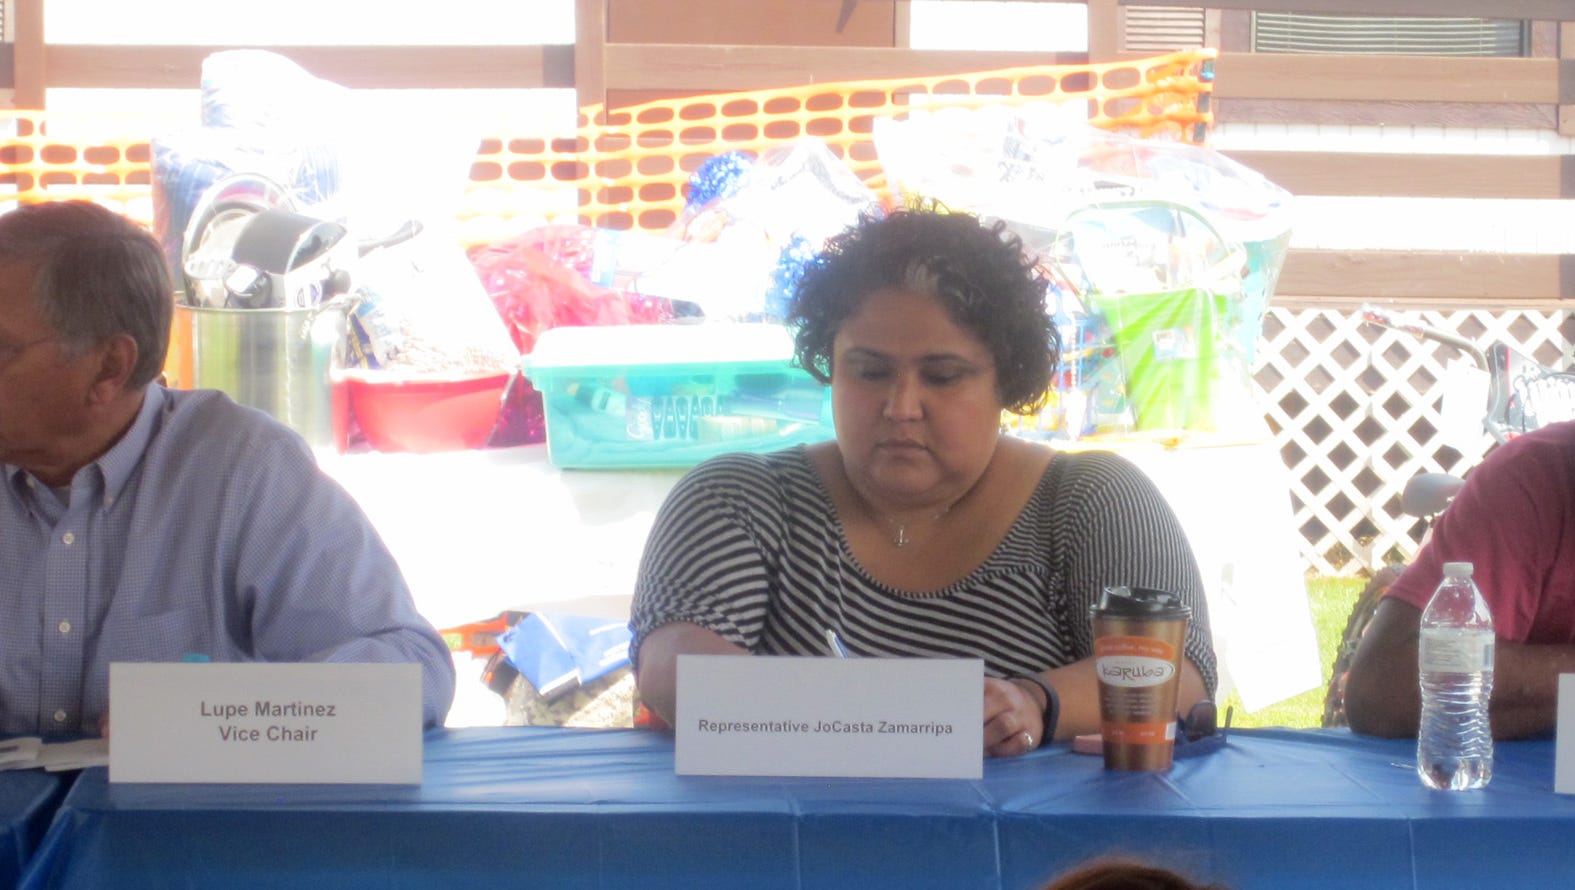 Members of the Governor's Council on Migrant Labor listen to testimony on the need for additional safe, affordable housing for seasonal agricultural workers.  Pictured (from left) are Lupe Martinez, interim Chair of the Governor's Council on Migrant Labor, President/CEO, UMOS, State Representative JoCasta Zamarripa, and Dr. Enrique Figueroa.